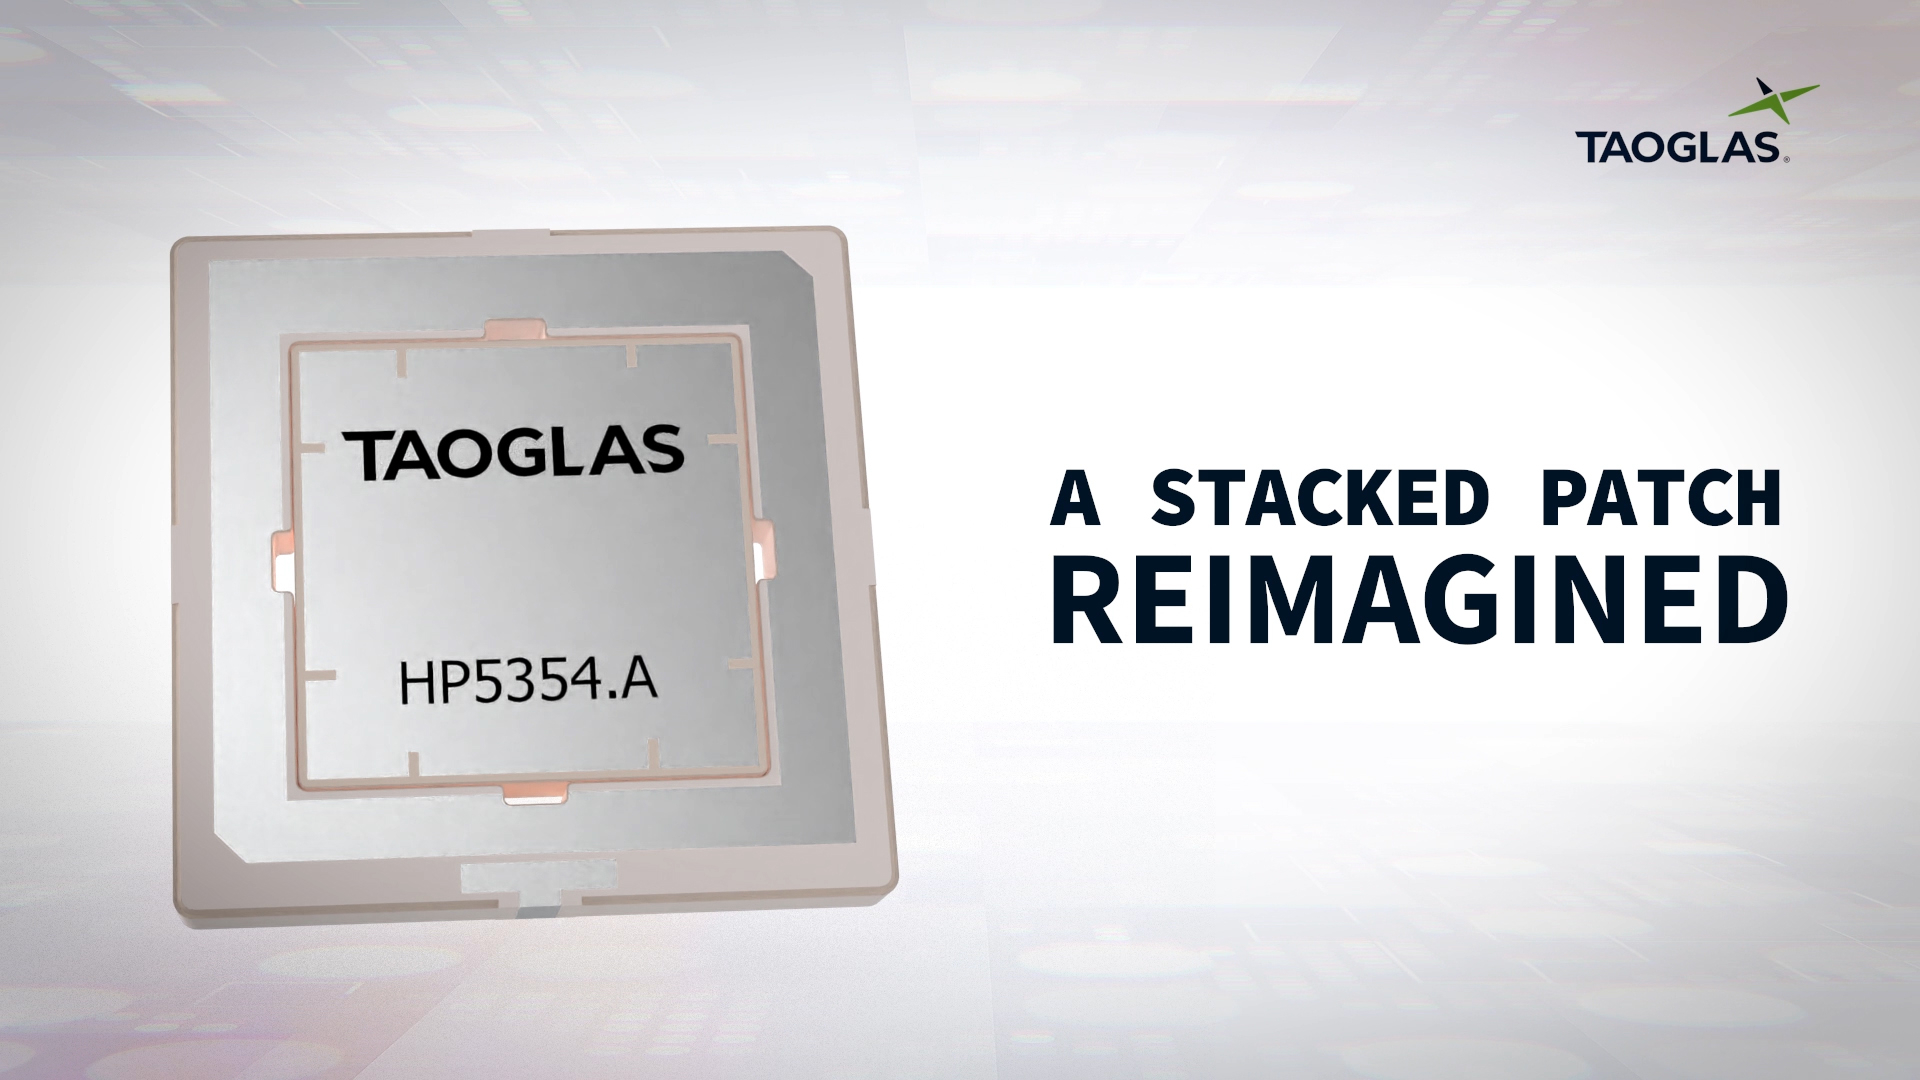 Taoglas announces Inception, a new GNSS L1/L5 ultra-low-profile “patch-in-a-patch” antenna. The HP5354.A offers dual-band stacked patch performance in a standard 35 x 35 x 4mm form factor as the second antenna is recessed into the first, without stacking the parts.